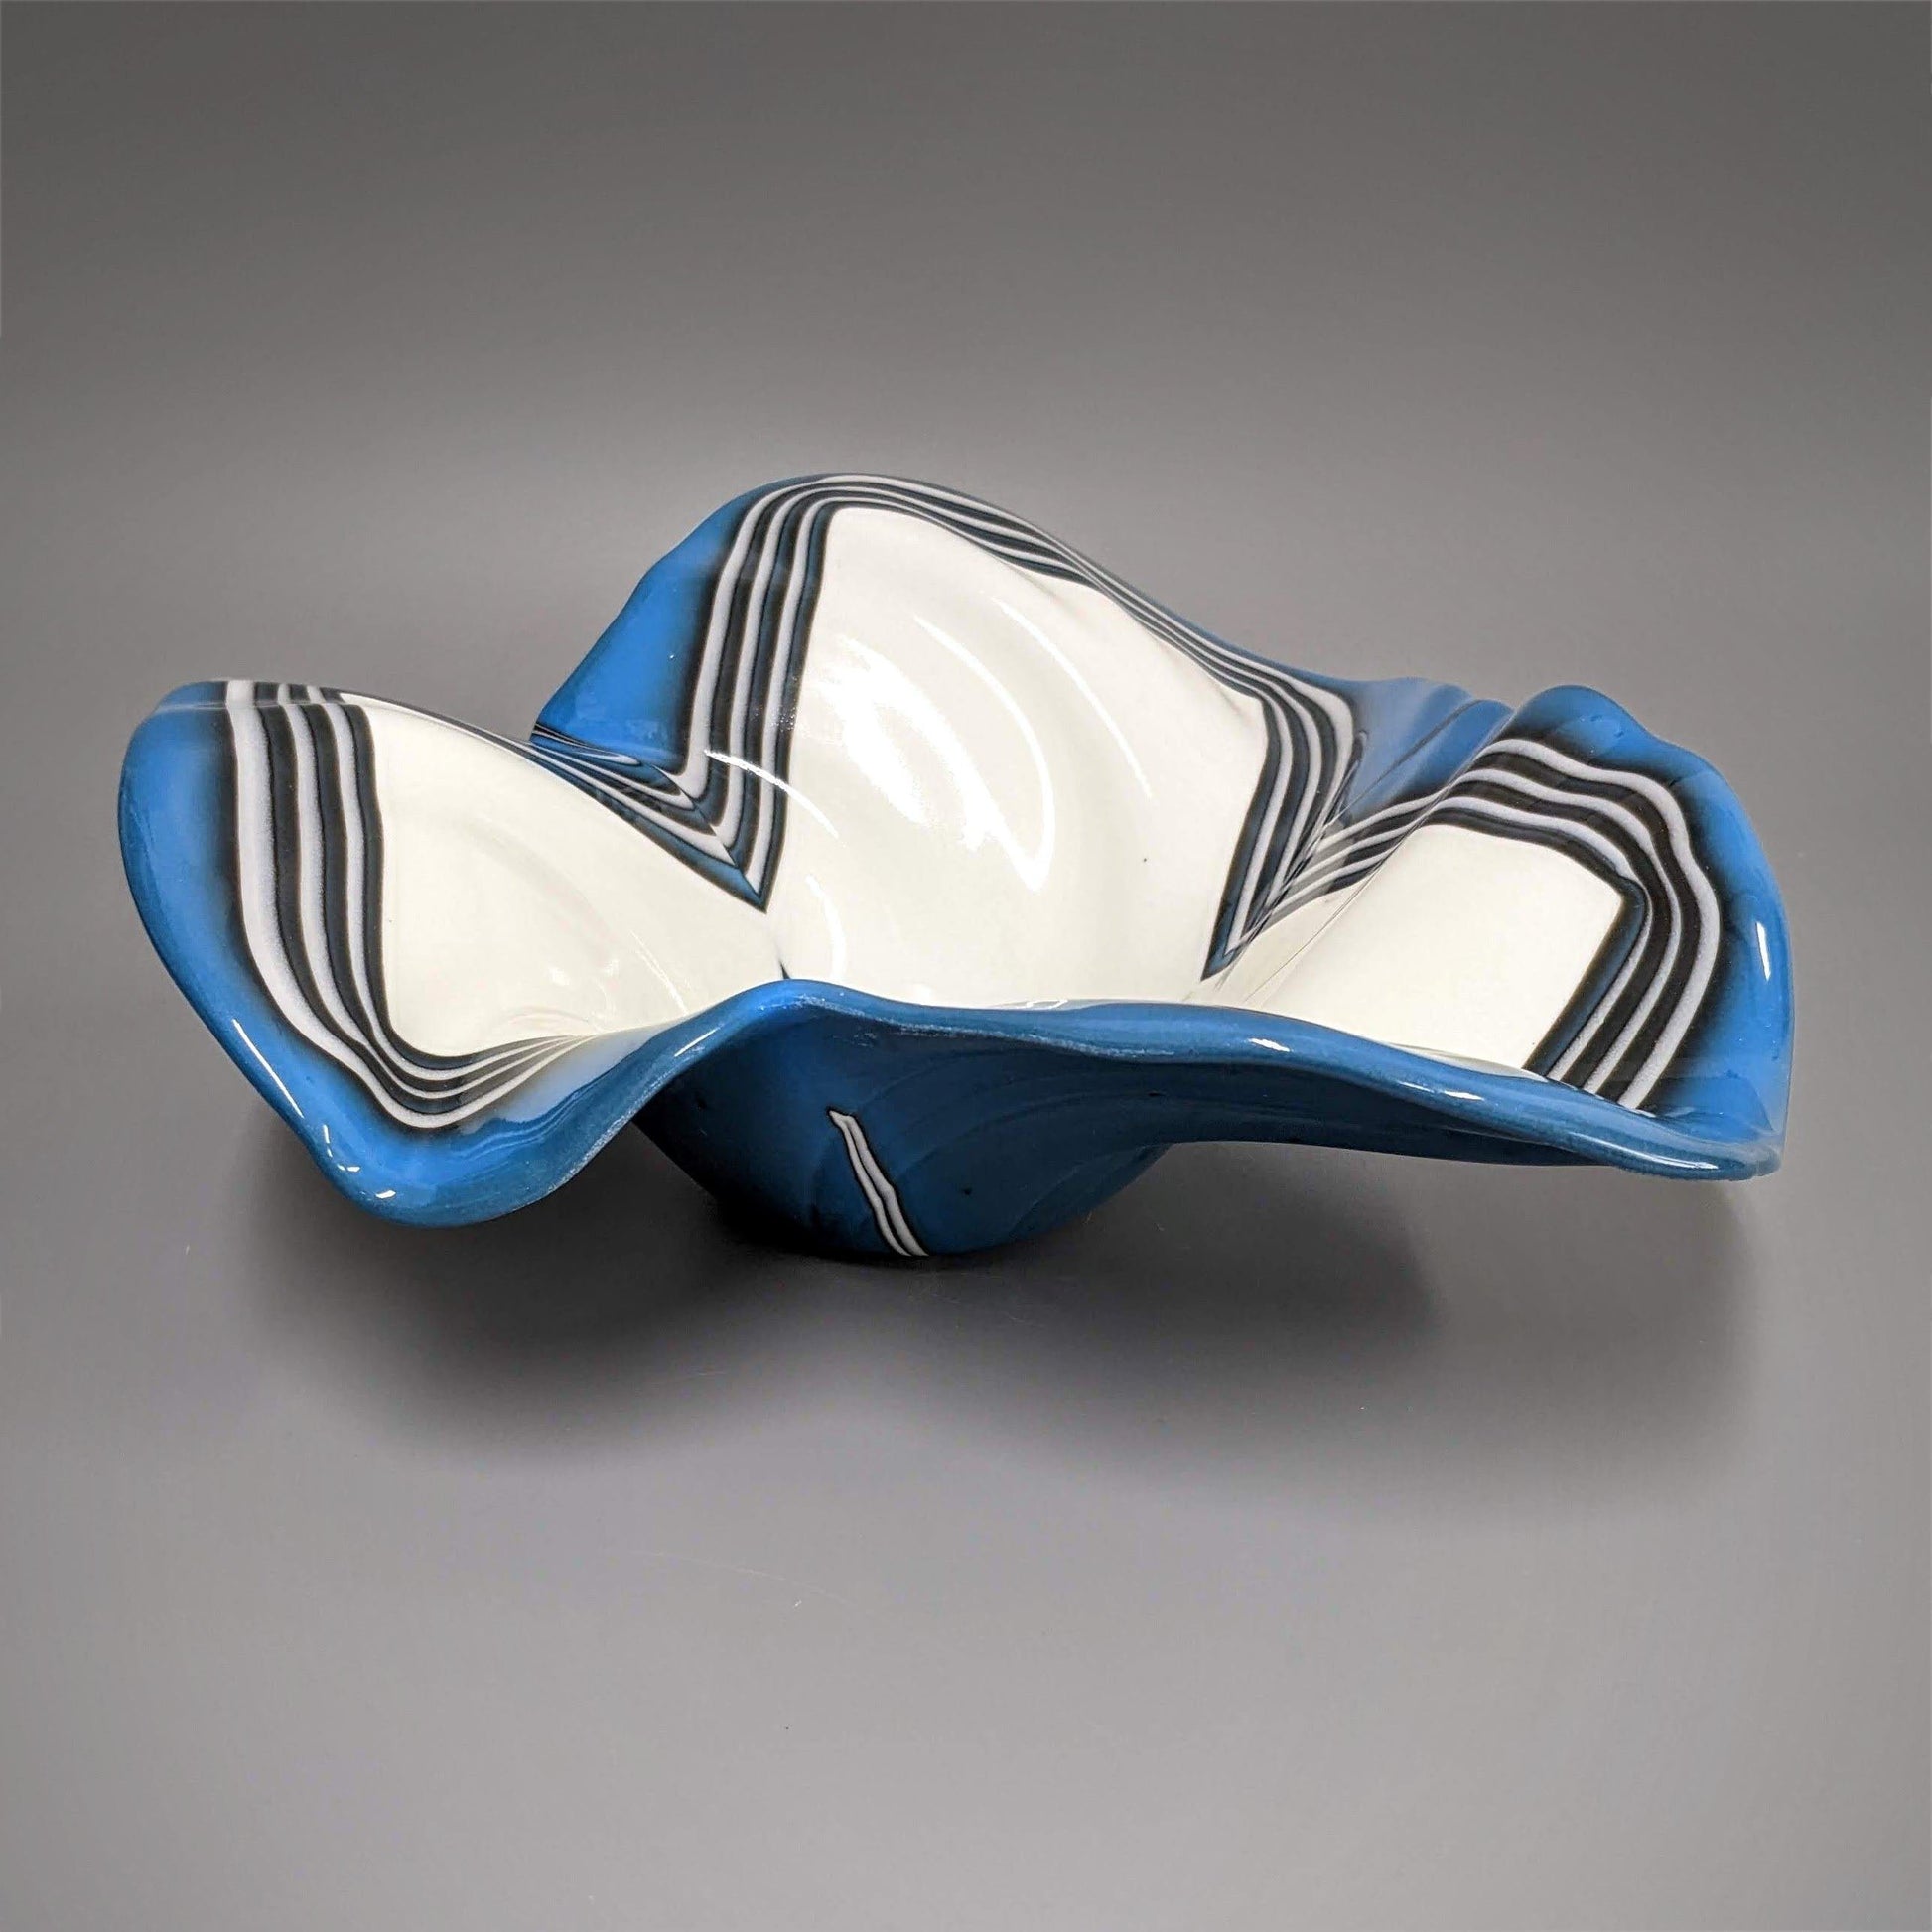 Glass Art Wave Bowl in Dark Turquoise Blue and Off White | Handmade